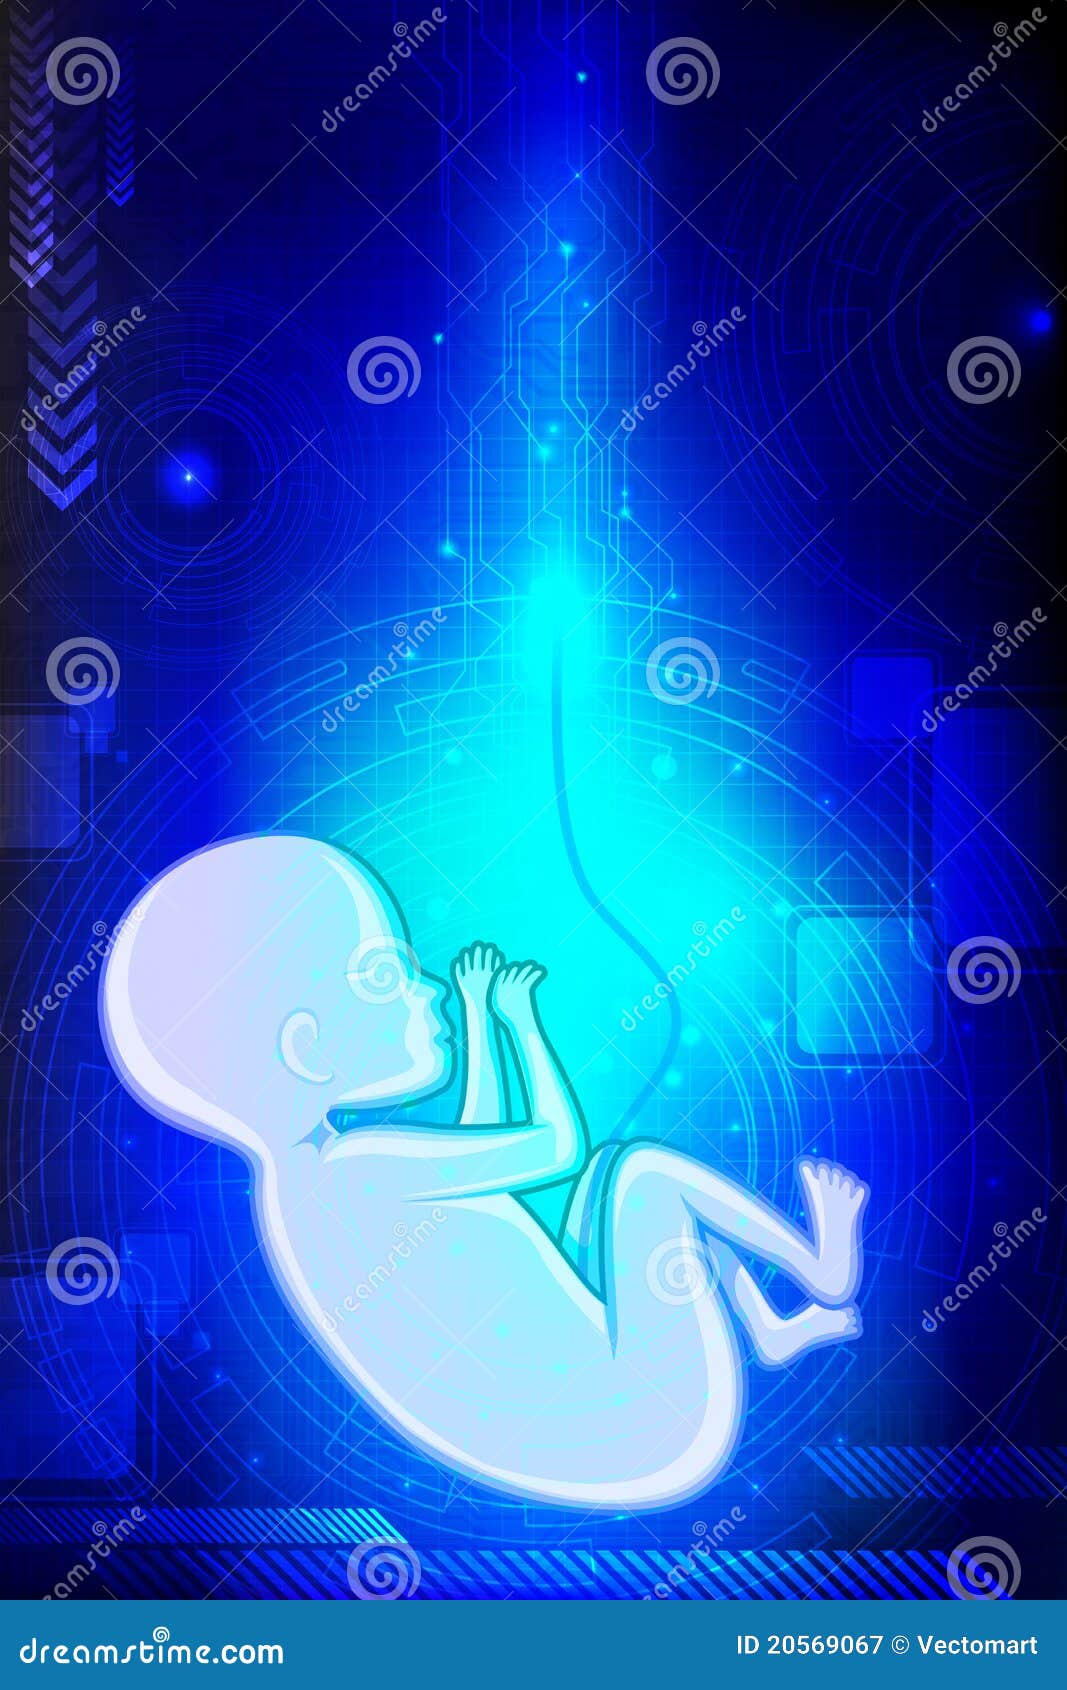 free clipart baby in womb - photo #50